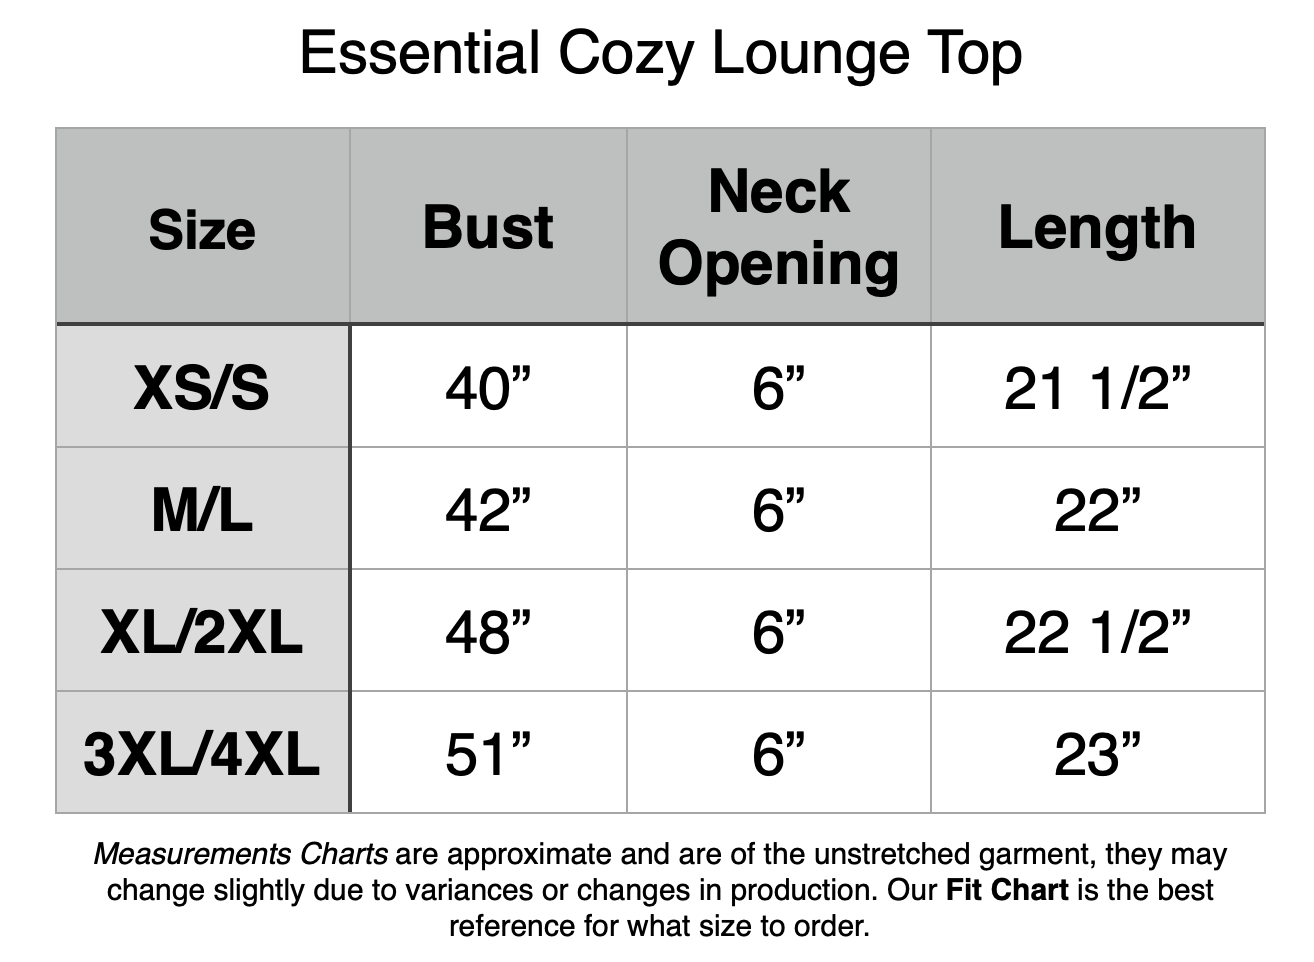 Essential Cozy Lounge Top: XS/S - 40" Bust, 6" Neck Opening, 21.5" Length. M/L - 42" Bust, 6" Neck Opening, 22" Length. XL/2XL - 48" Bust, 6" Neck Opening, 22.5" Length. 3XL/4XL - 51" Bust, 6" Neck Opening, 23" Length.